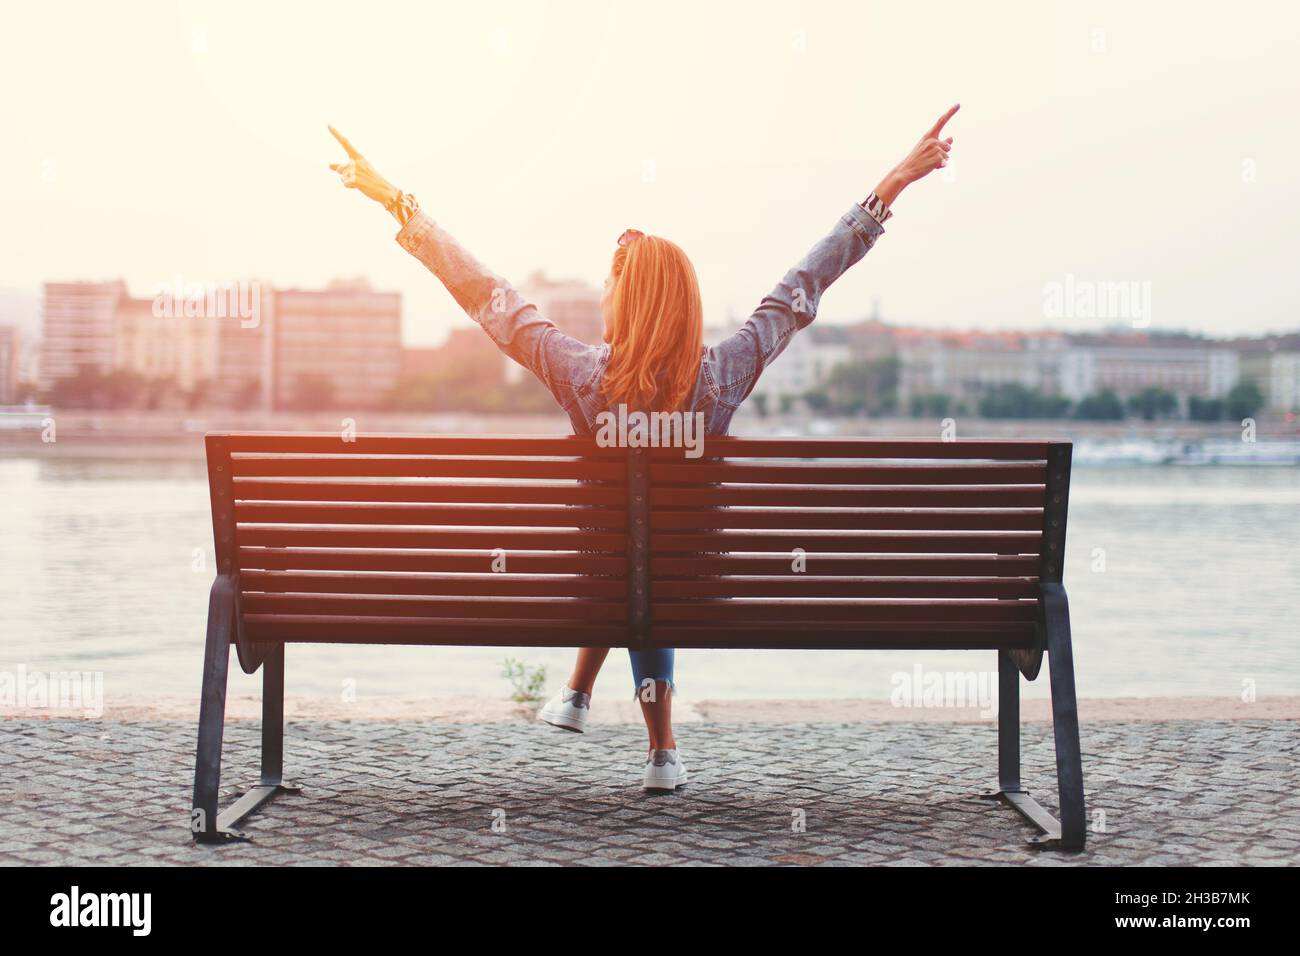 Young redhead woman arms raised on bench in susnet at riverbank back view Stock Photo